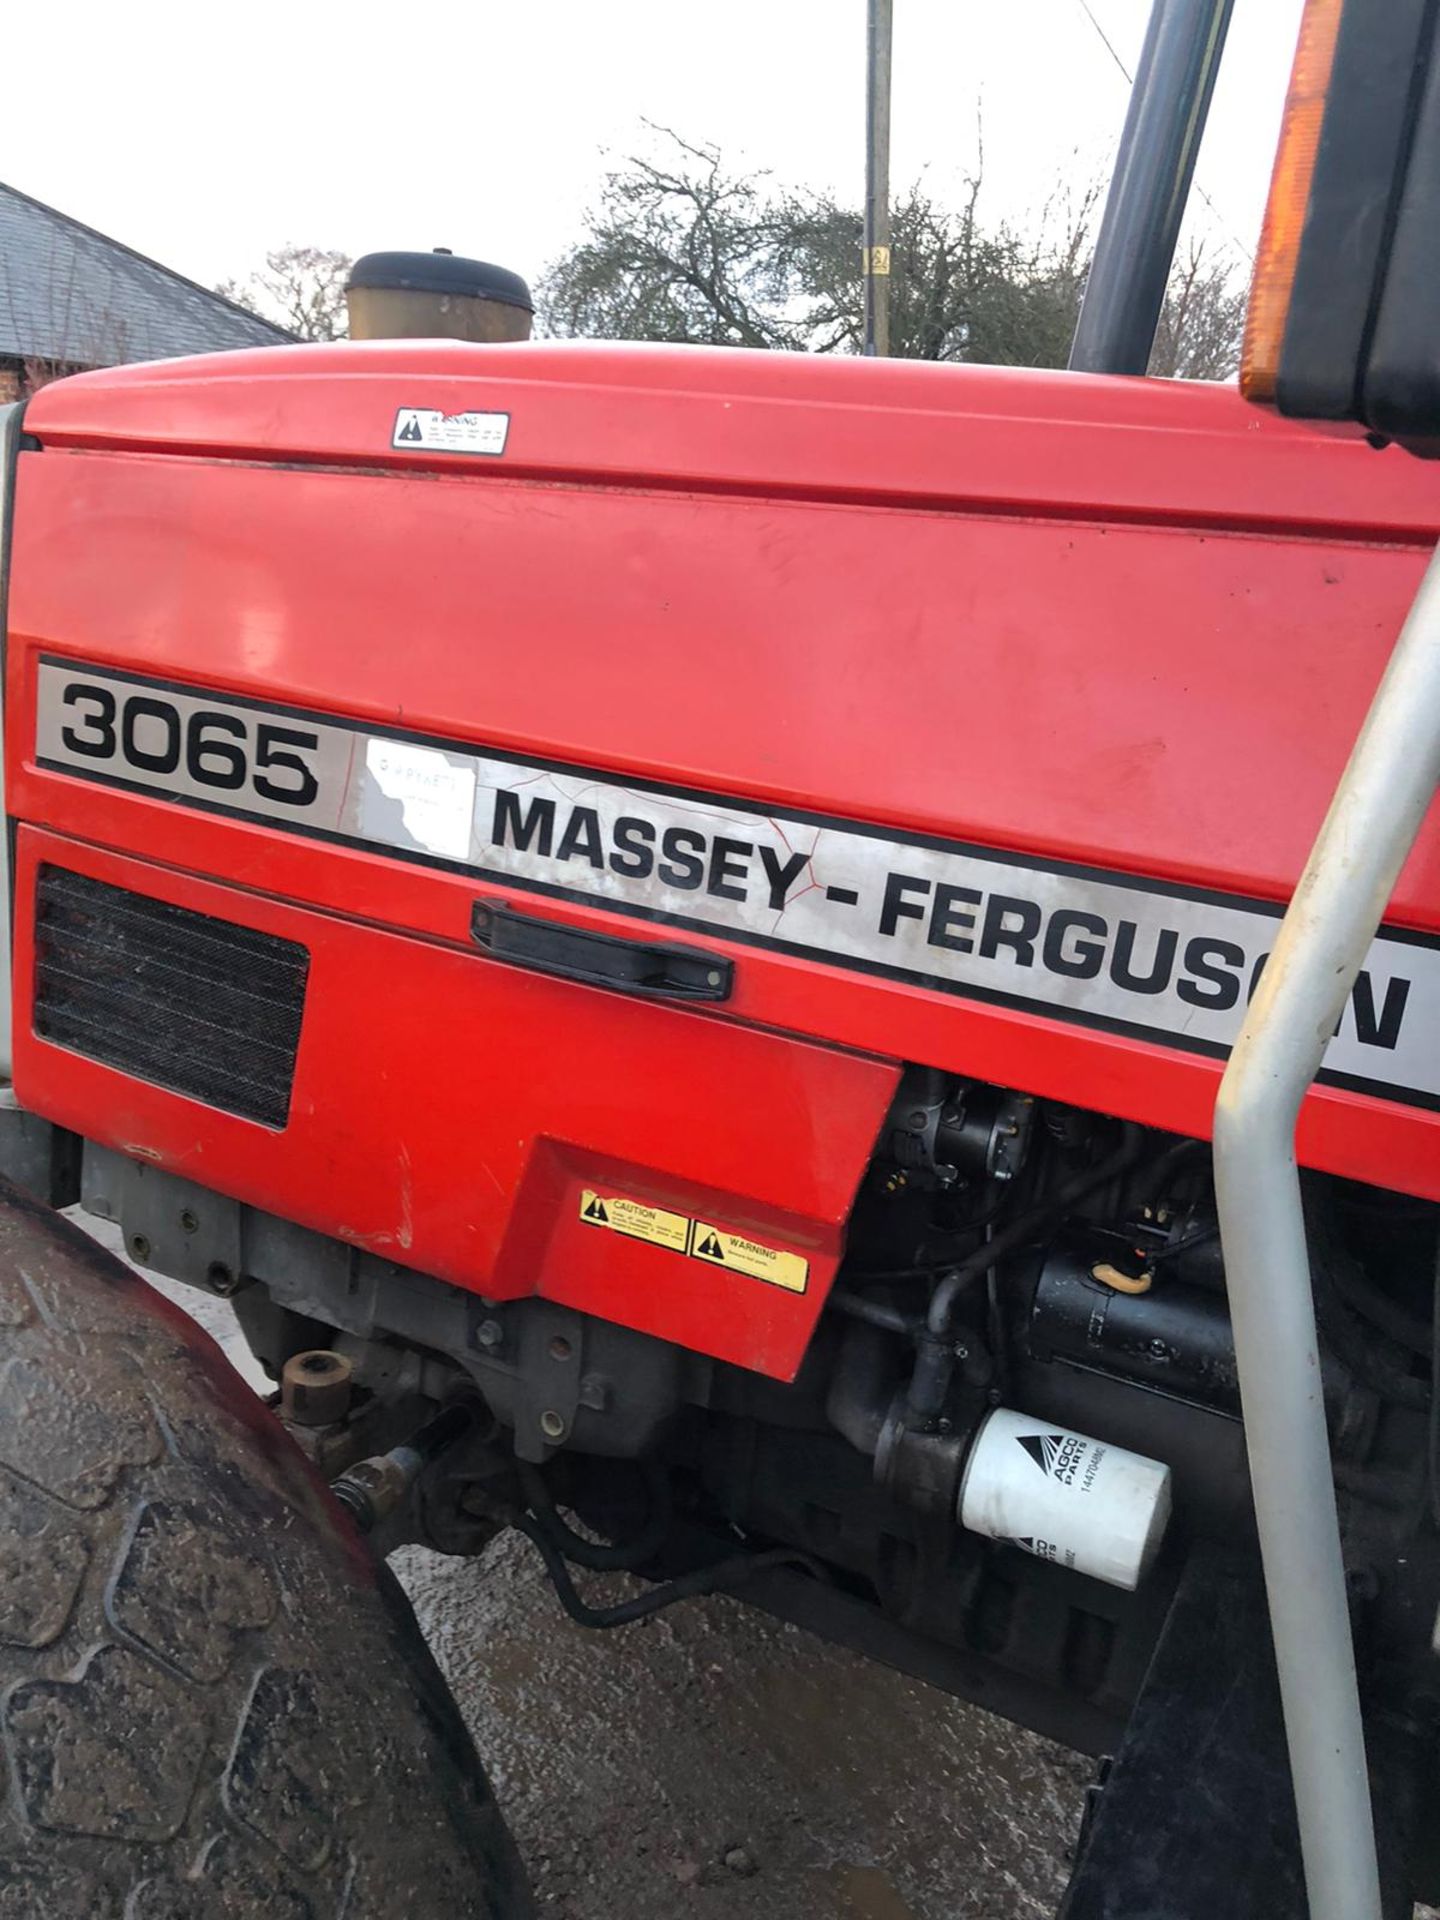 MASSEY FERGUSON 3065 TRACTOR, RUNS AND WORKS, 3 POINT LINKAGE, YEAR 1992, ROAD REGISTERED *PLUS VAT* - Image 5 of 8